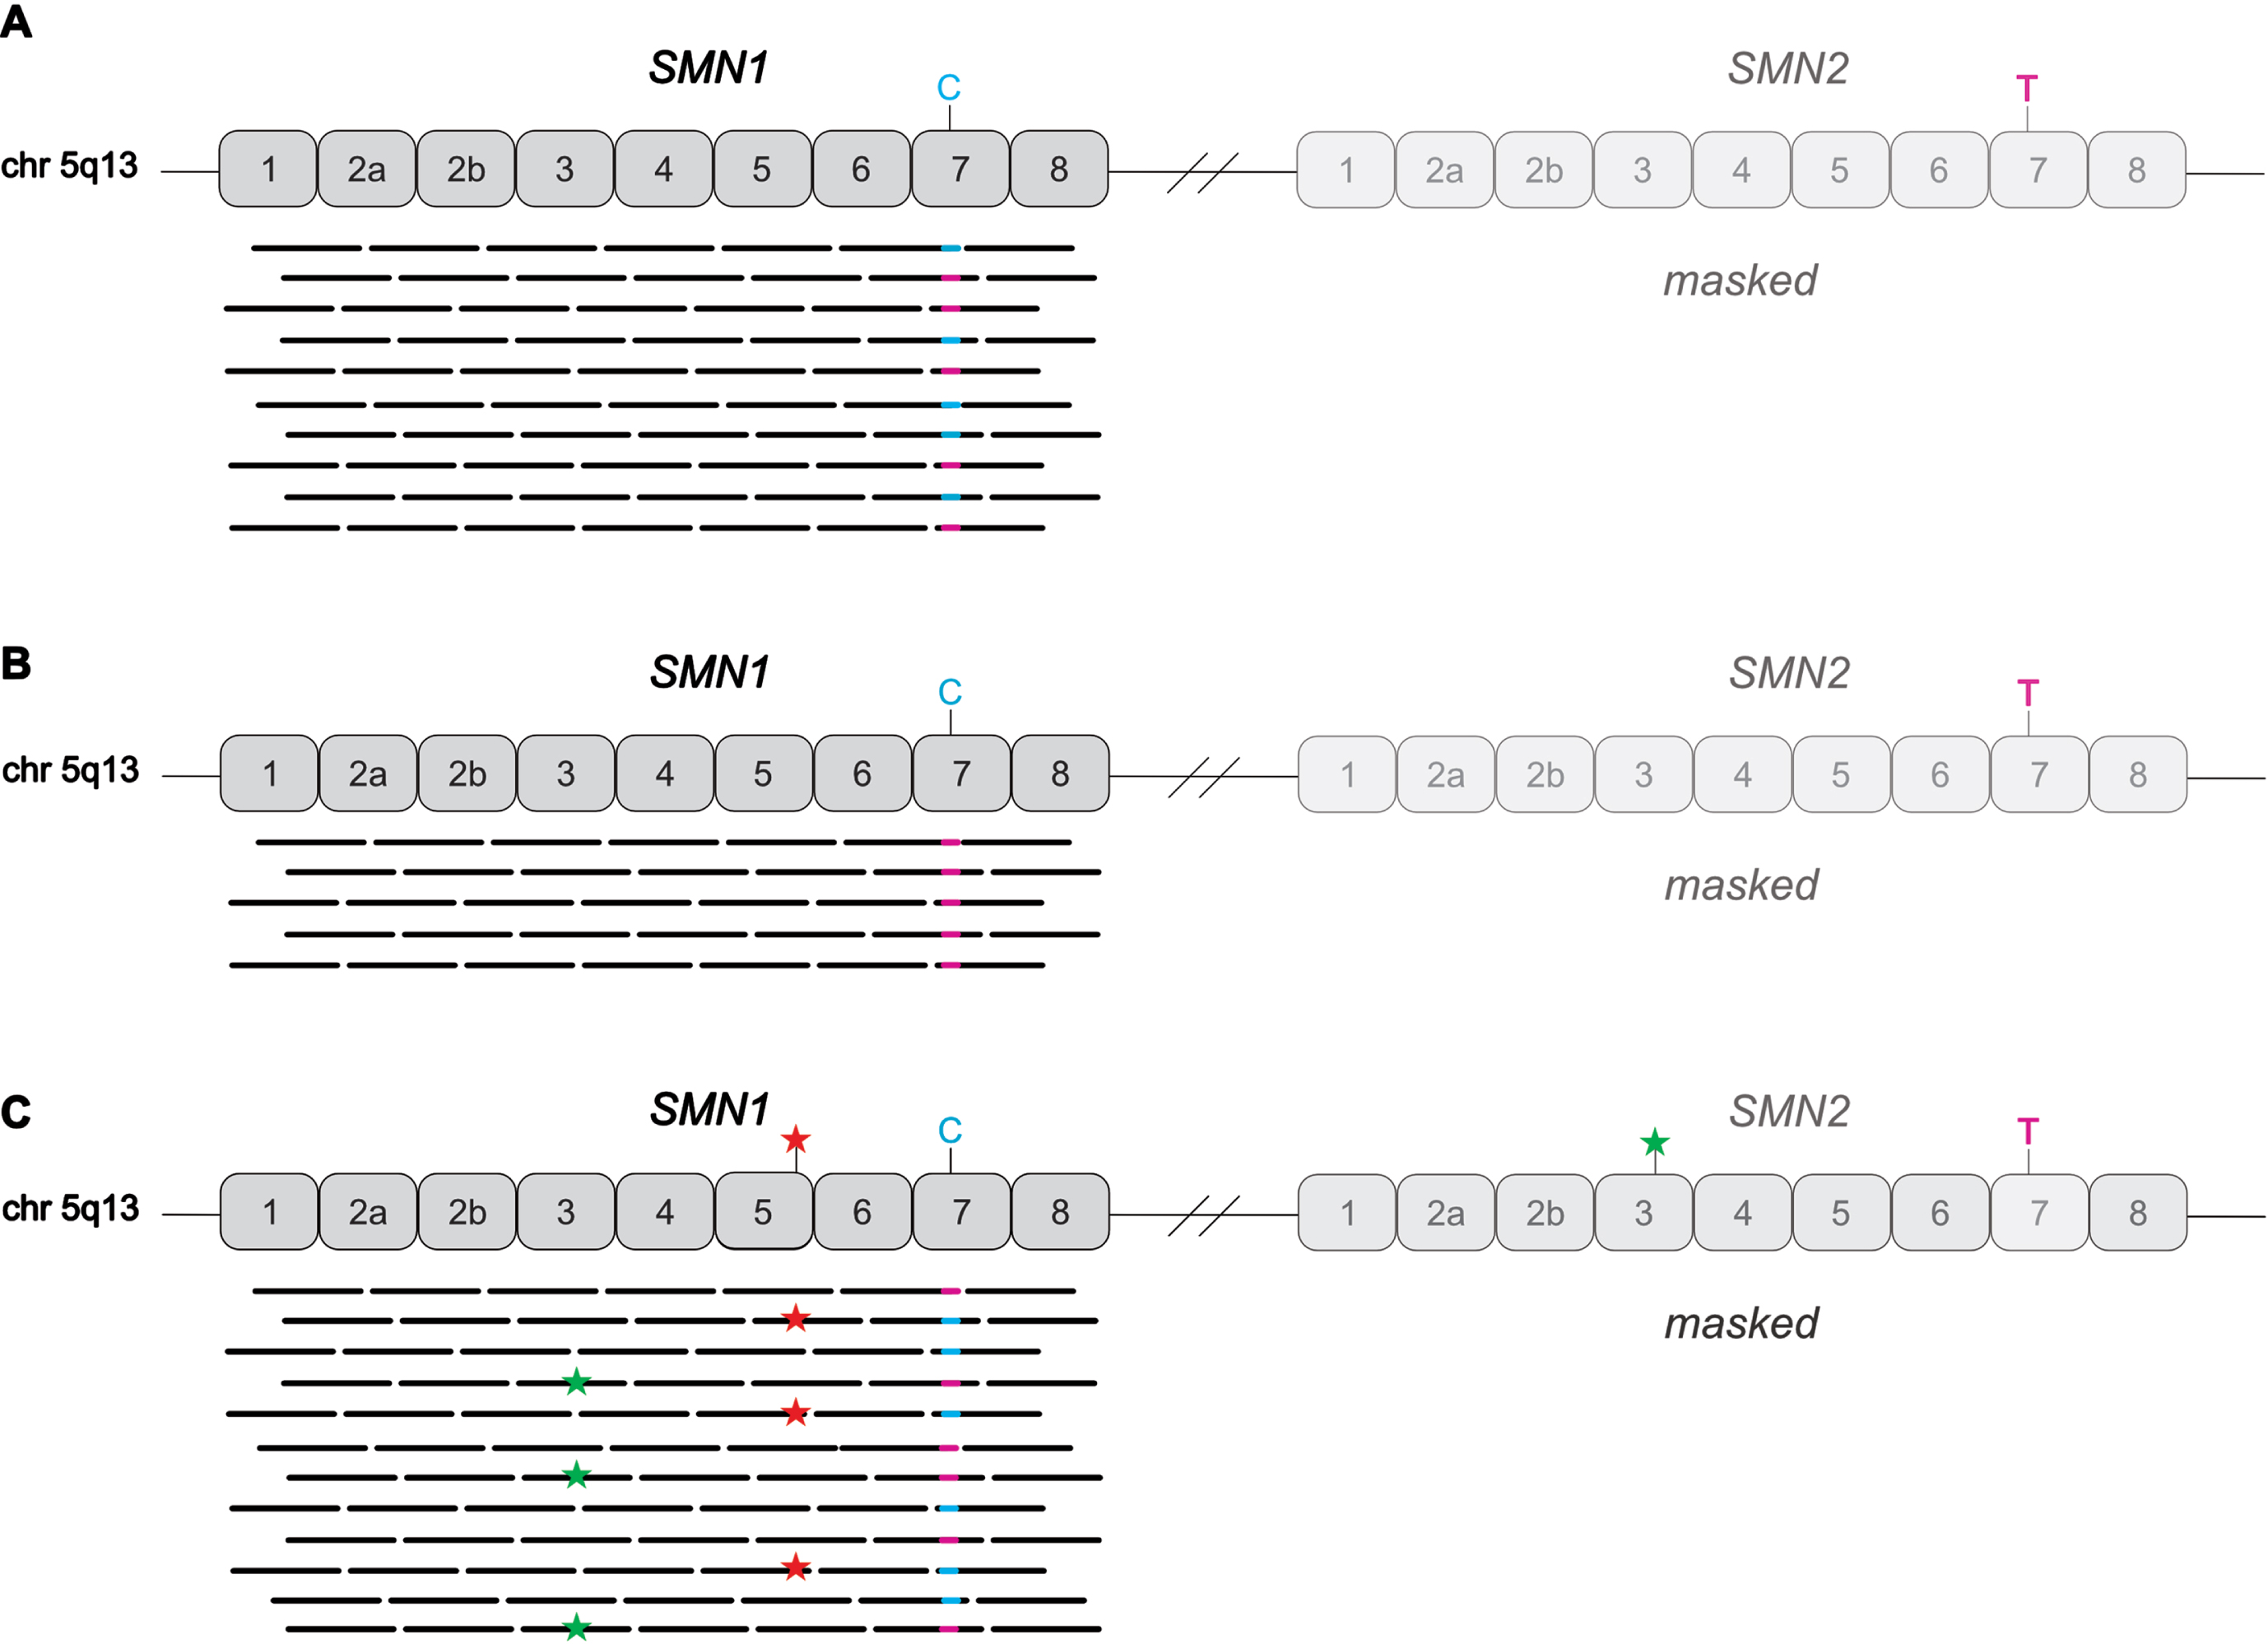 Schematic representation of the SMN1/2 locus on chromosome 5q. SMN1 and SMN2 genes differ in the “Gene-determining variant” (GDV) NM_000344.4:c.840C>T p.(Phe280=) (rs1164325688) in exon 7, depicted as C (blue) in SMN1 and T (red) in SMN2. By masking of SMN2 in the reference genome, all SMN1/2 reads are mapped to SMN1. SMN1 can be analyzed for SNVs by the caller. (A) Example of a normal control: The T (GDV of SMN2) is called in a VAF of <0.9 indicating absence of a homozygous deletion of exon 7 of SMN1. (B) Example of a patient with a homozygous SMN1 deletion: There are no reads with the C (SMN1). Thus, the variant caller indicates T (GDV of SMN2) with a VAF of >0.9 (“homozygous”). (C) Example of a patient with a pathogenic SNV in SMN1 (indicated as red star) and a benign variant in SMN2 (indicated as green star). After applying the SMN2-masked pipeline, SNVs in SMN1 as well SMN2 reads are called. It has to be considered that the assumed diploid sequence for the variant calling is not anymore true and is at least doubled or even more tripled resulting in variant allele frequencies (VAF) ≠ 0.5 for heterozygous variants. The VAF depends on the SMN1 and SMN2 copy number of the individual. A heterozygous SNV in oneSMN1copy may have a low VAF (e.g. of 0.2 in case of two SMN1 and three SMN2 copies).